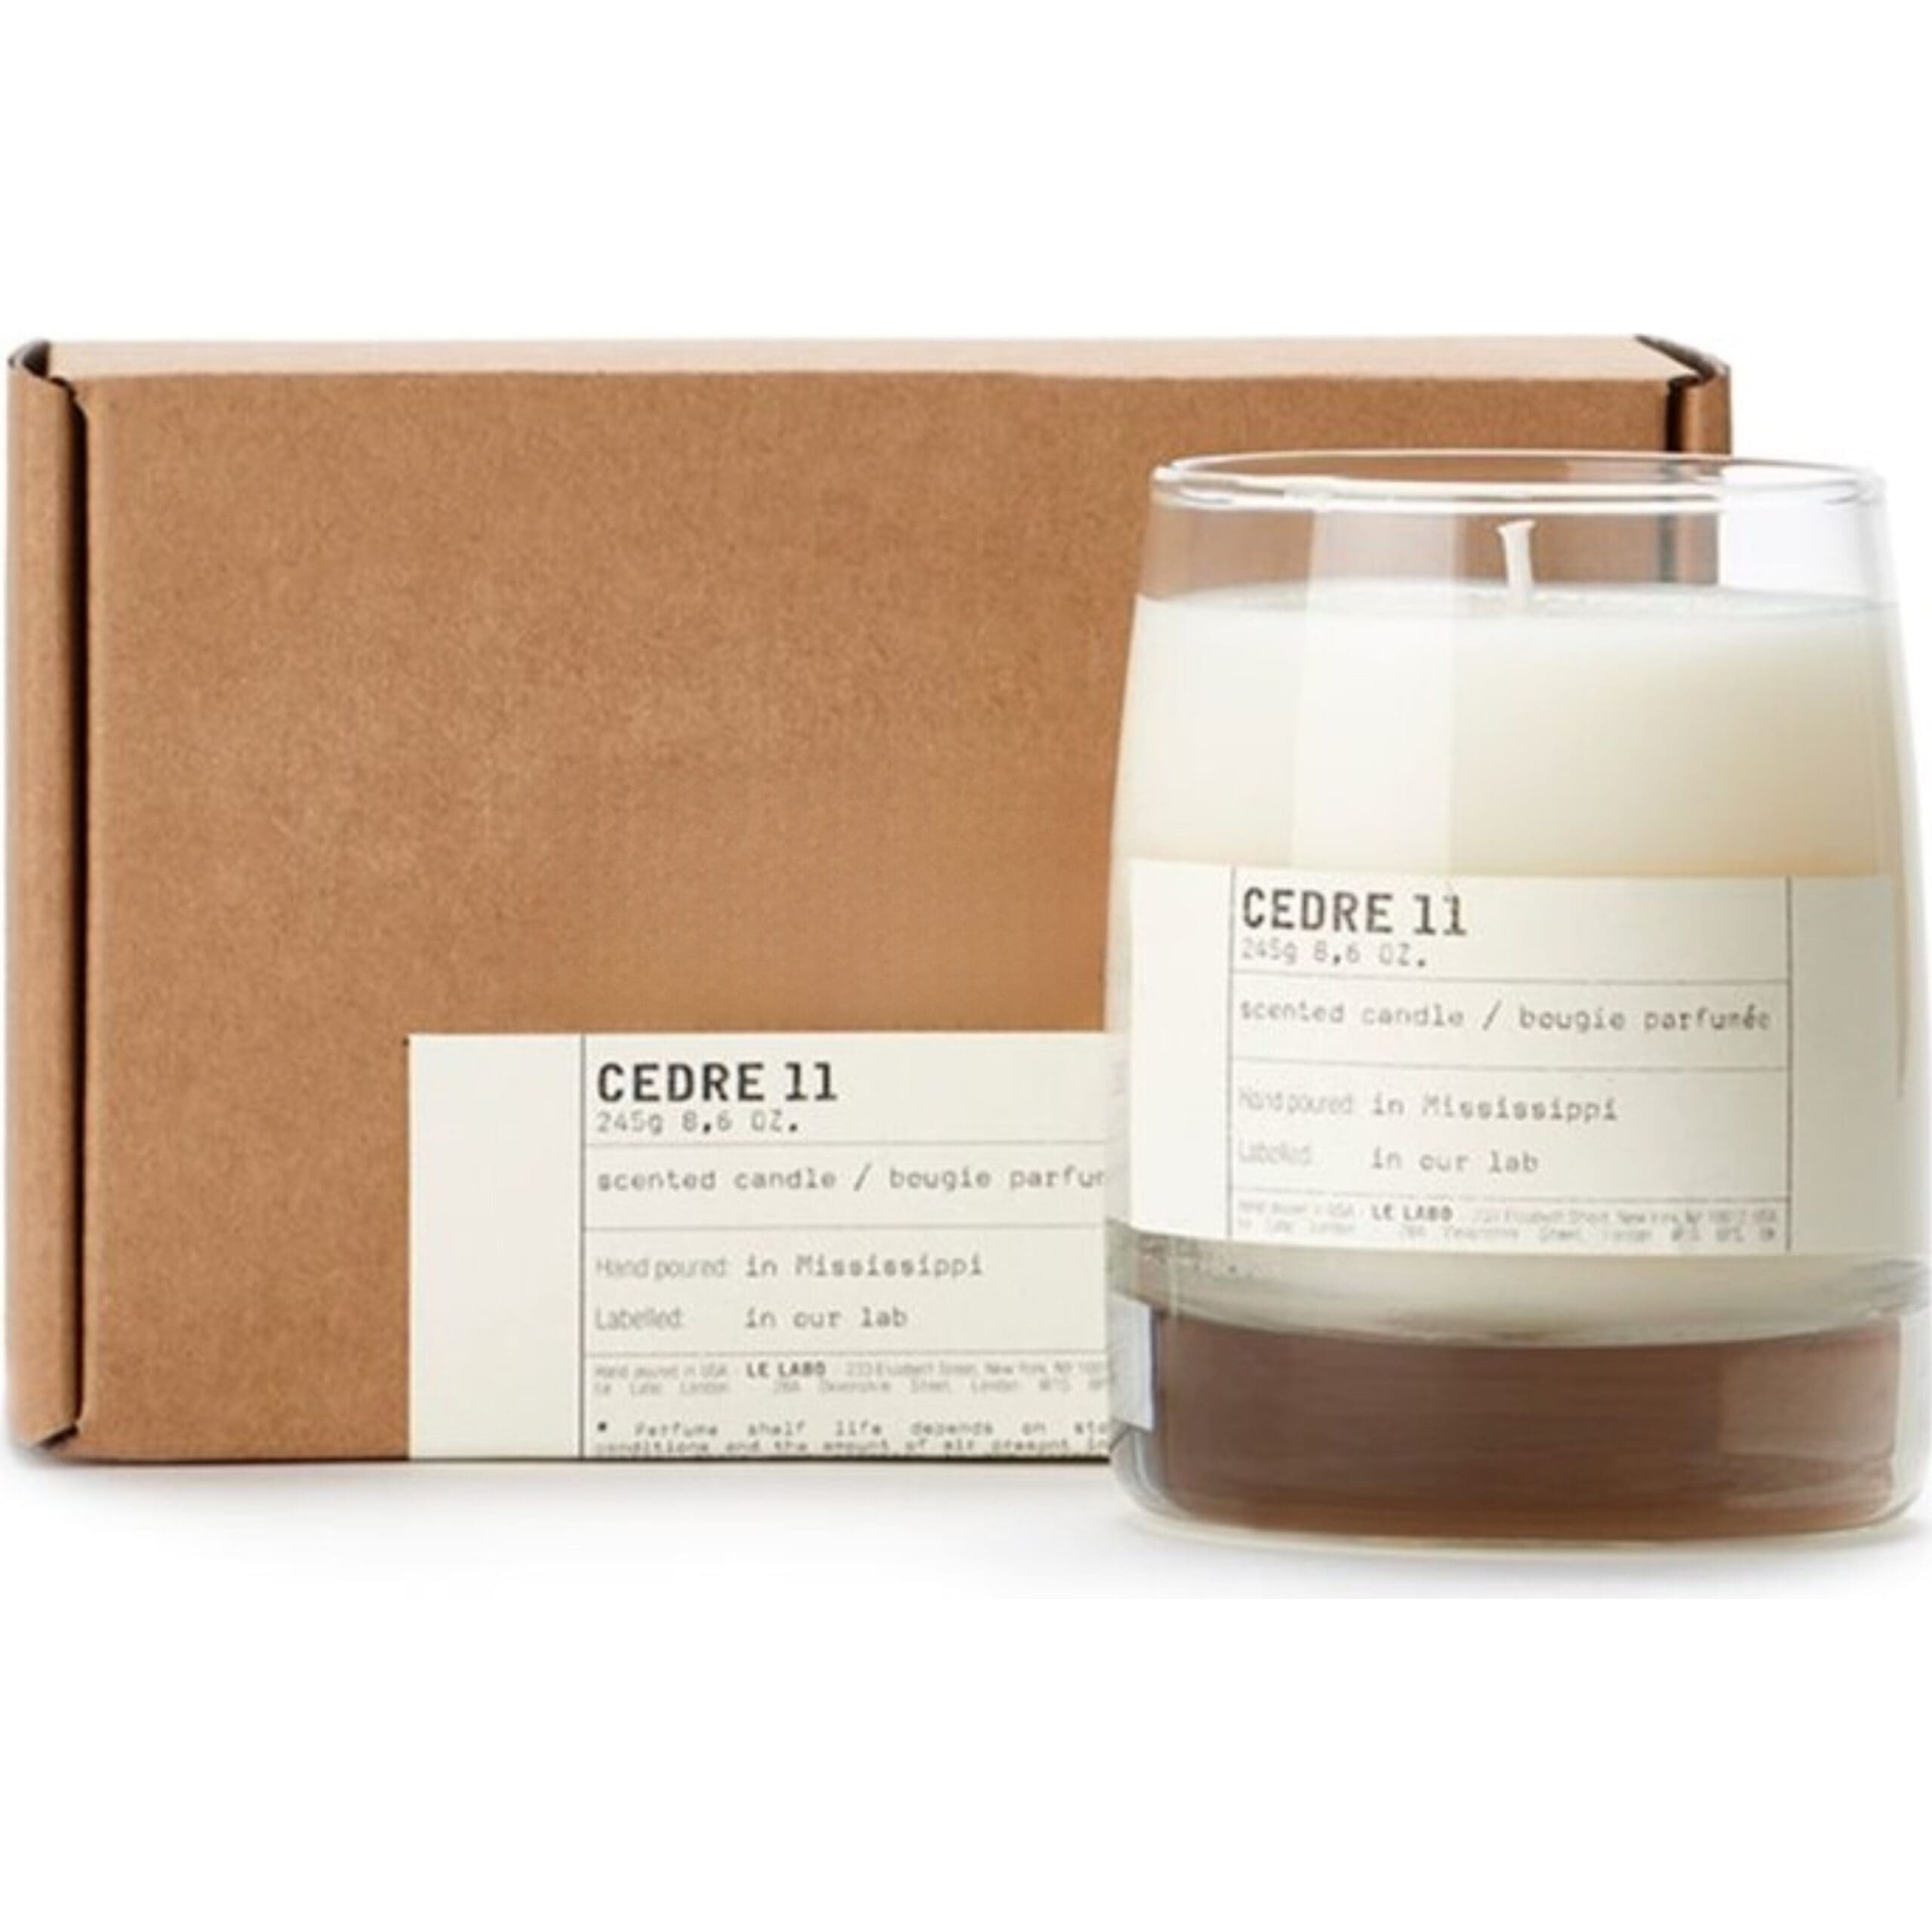 3306 CEDRE 11 SCENTED CANDLE 245 g